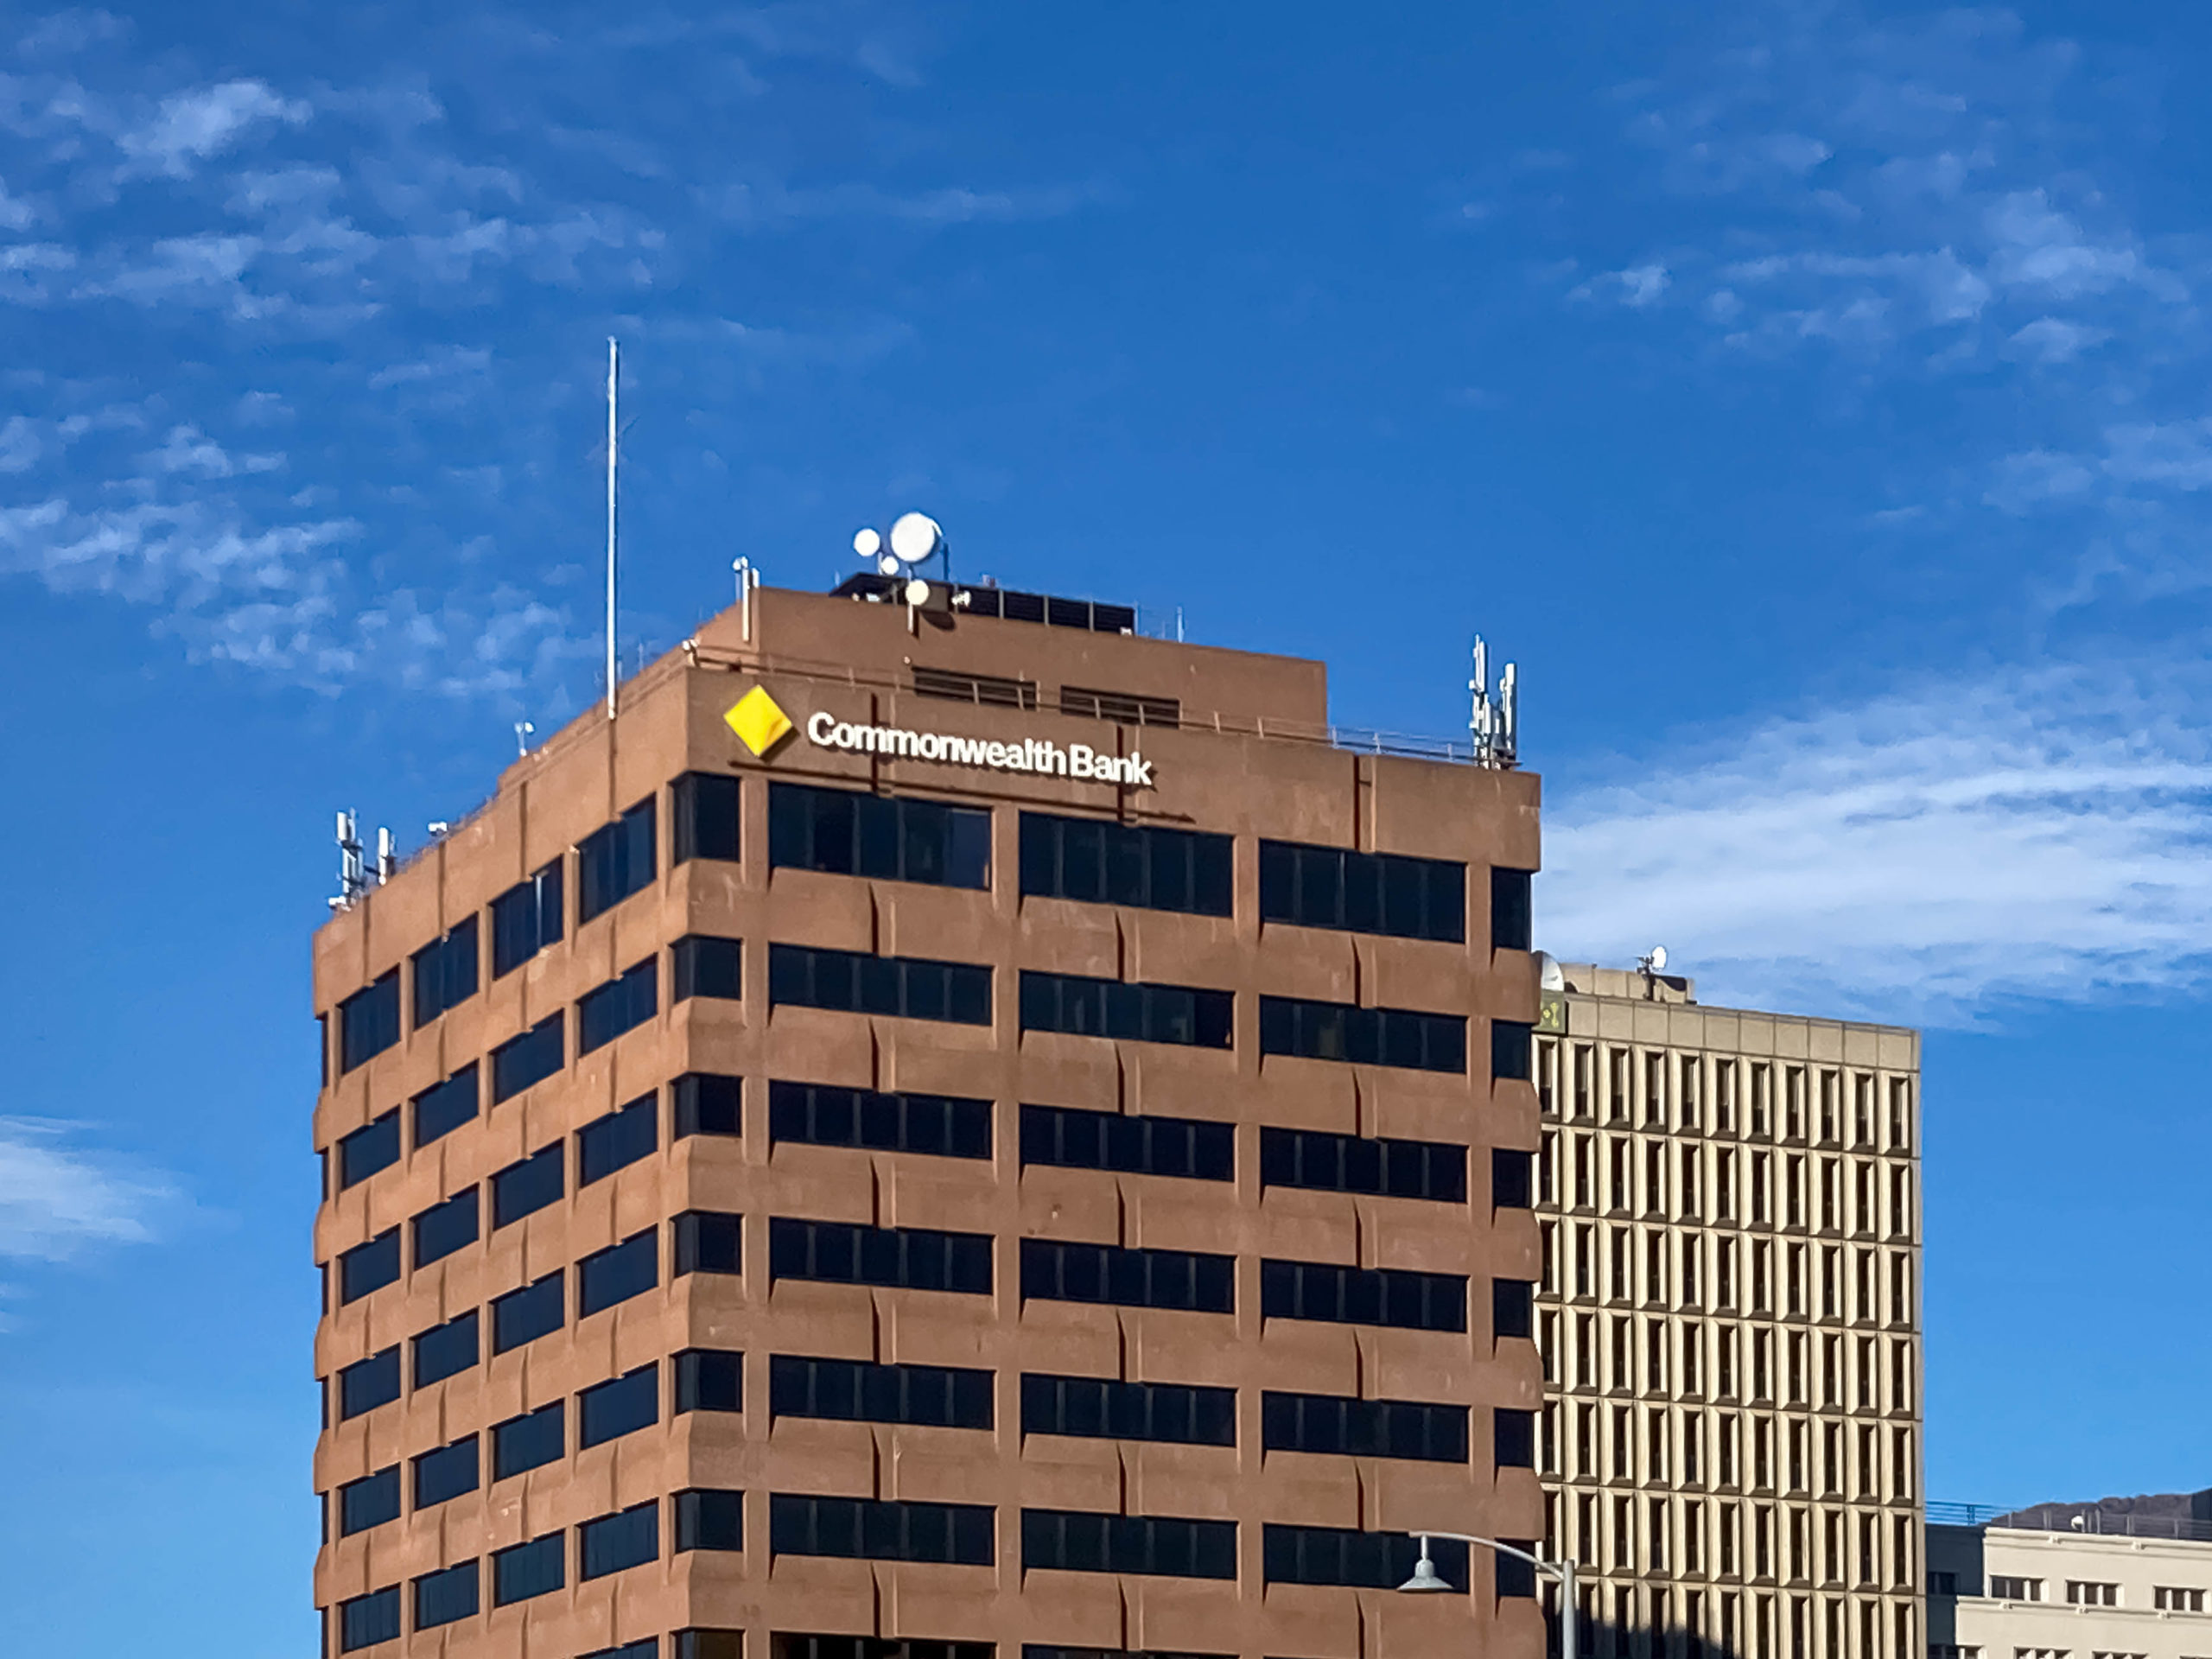 A brown modernist building with the Commonwealth Bank logo prominently displayed at the top